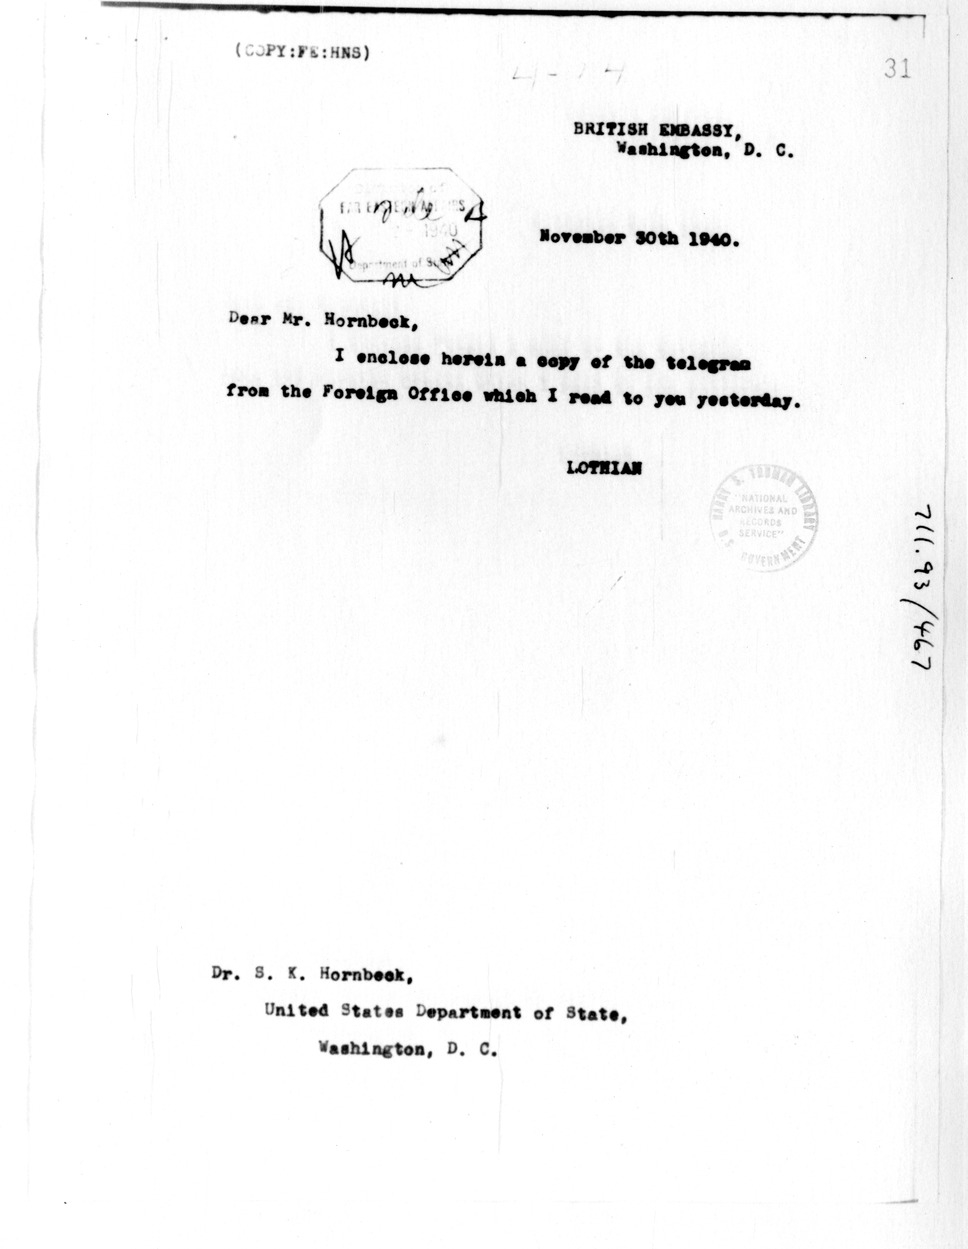 Memorandum from Lothian to S. K. Hornbeck, with Attached Telegram from the Foreign Office